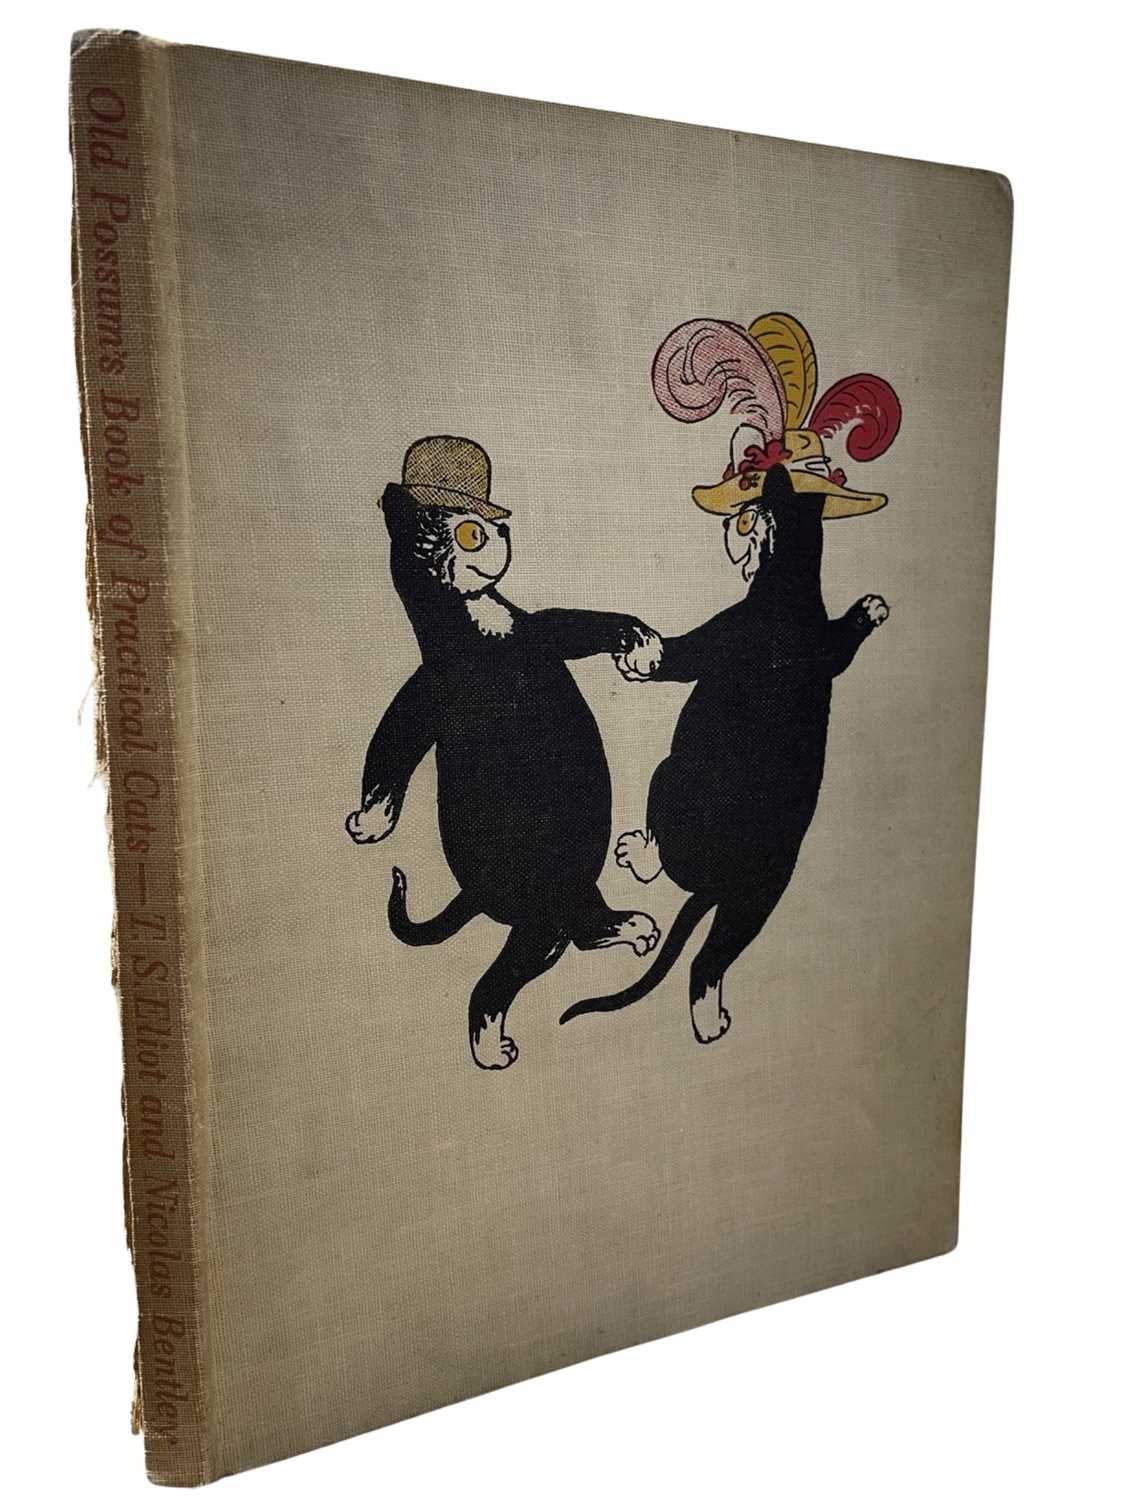 T S ELIOT: OLD POSSUM'S BOOK OF PRACTICAL CATS (Illustrated edition), London, Faber & Faber, 1946,